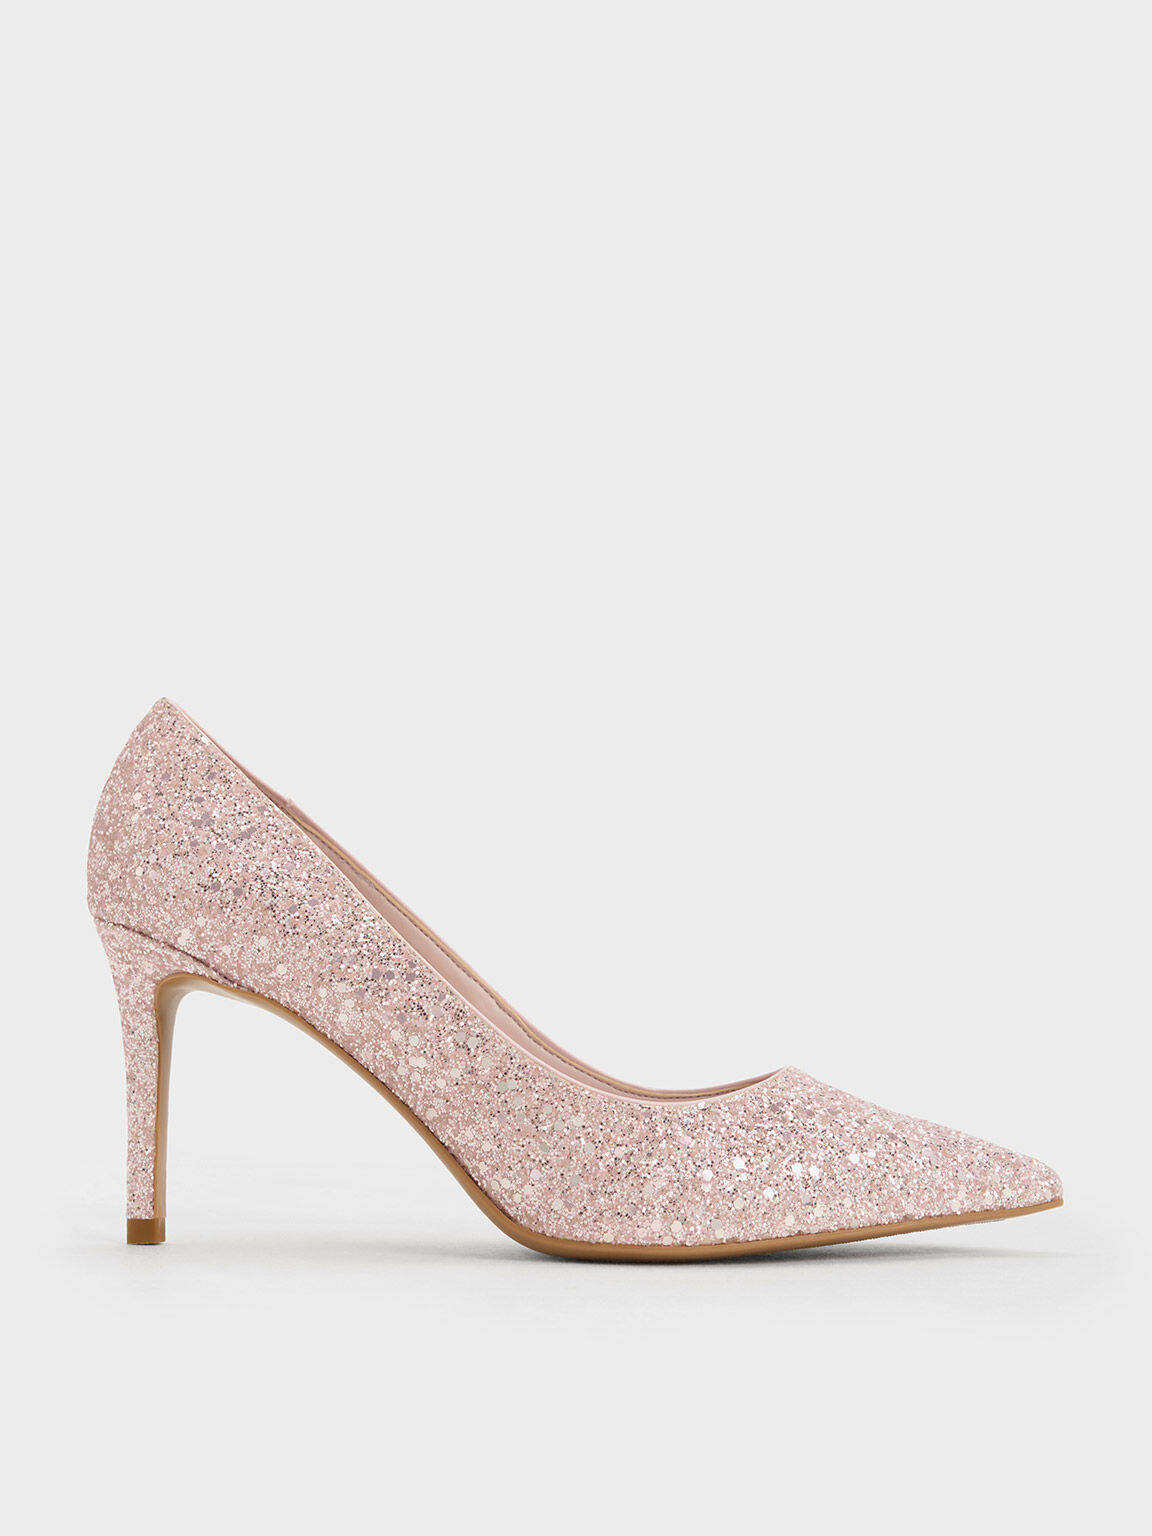 Glittery shoes, Pink glittery shoes, Heels